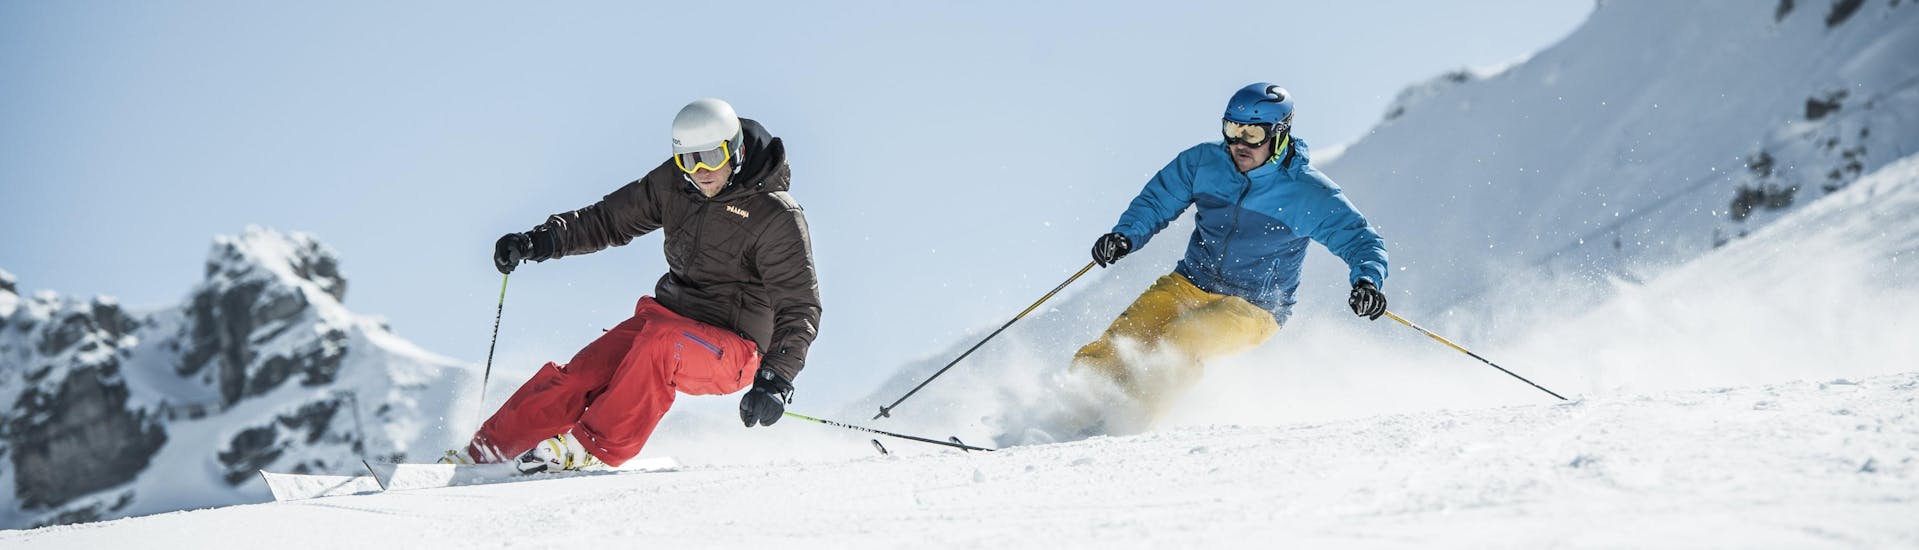 A skier practices the correct skiing technique during one of the private lessons in Spain.